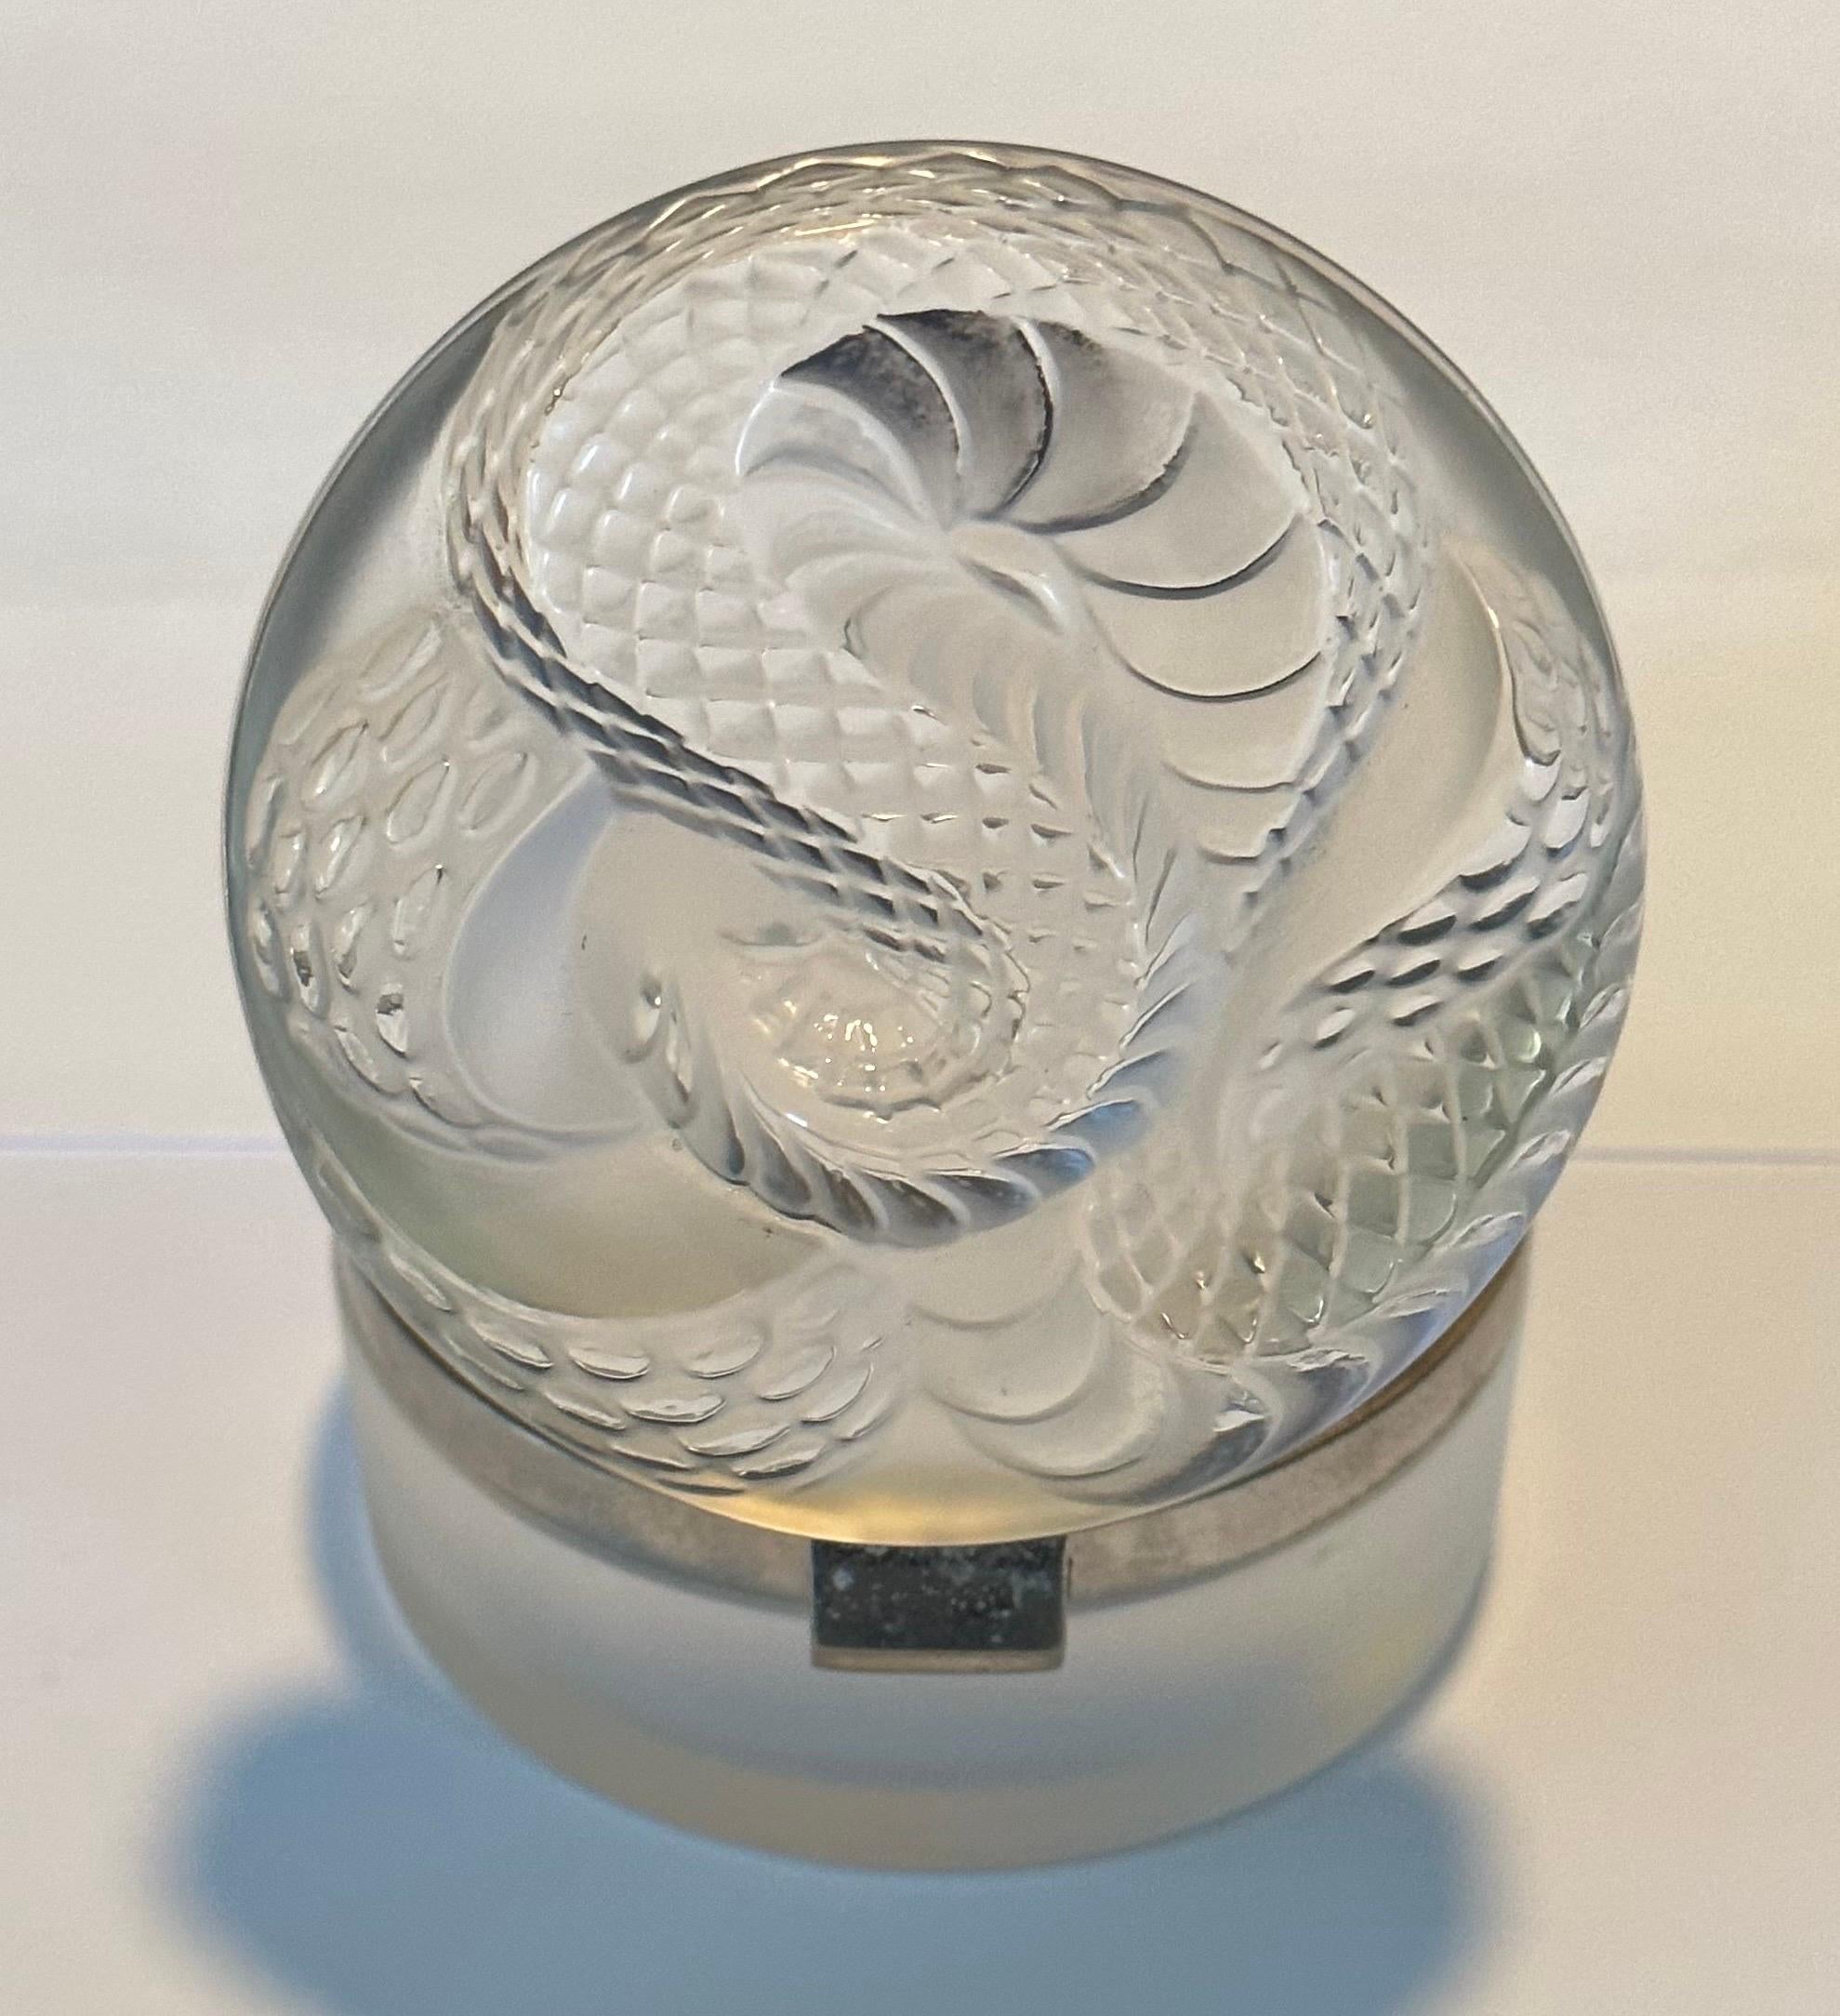 Frosted Crystal Coiled Serpent / Snake Lidded Powder Jar by Lalique of France 1